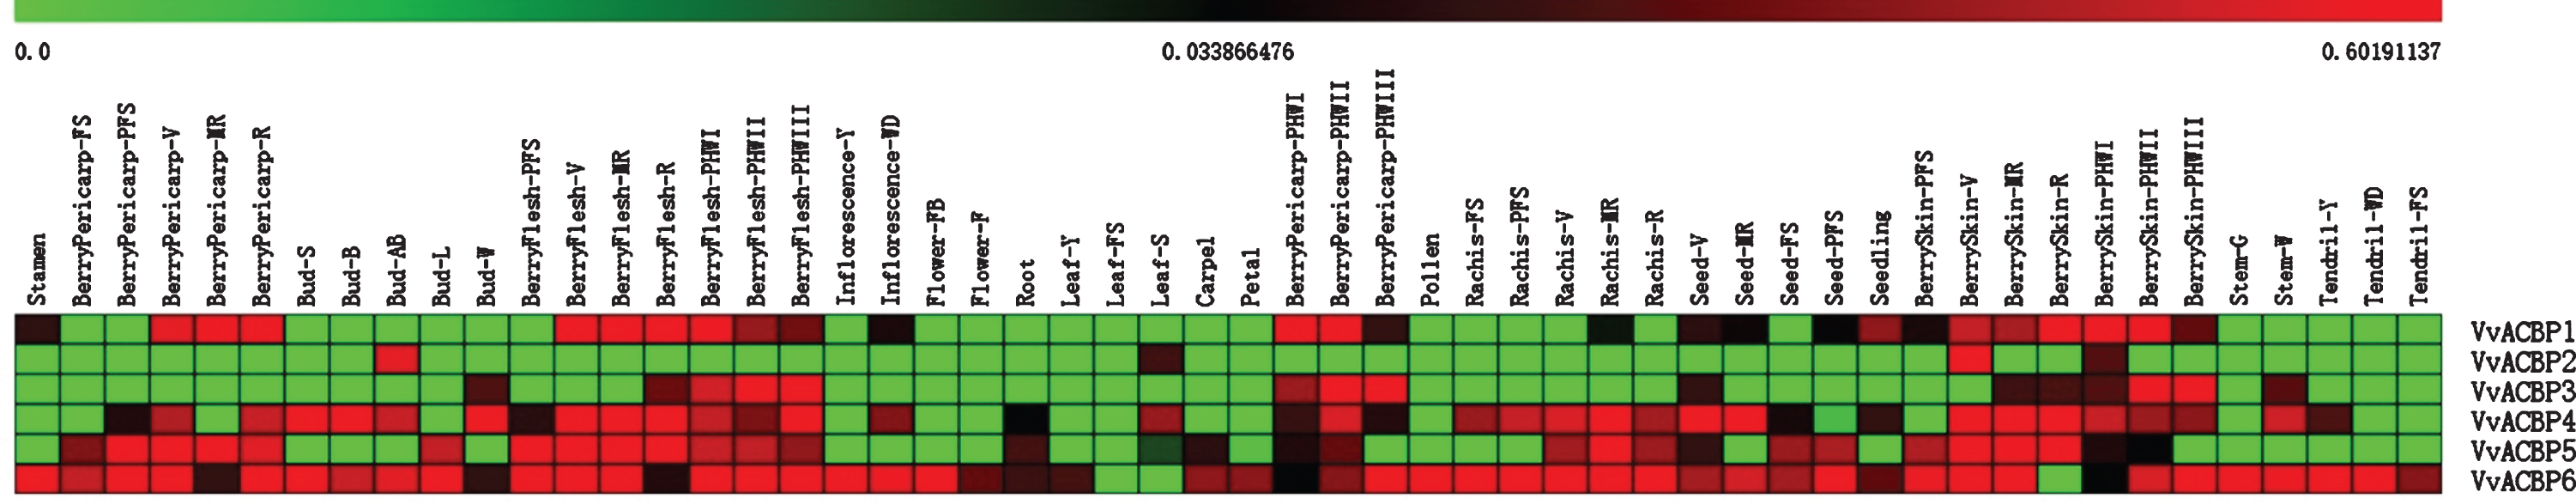 Expression profiles of VvACBP genes identified in 54 different grapevine tissues. Intensity of expression is represented in the colored bar at the top of the chart. Fifty-four different tissues were listed in the up. The scale bars represent values from 0 to 0.60191137.